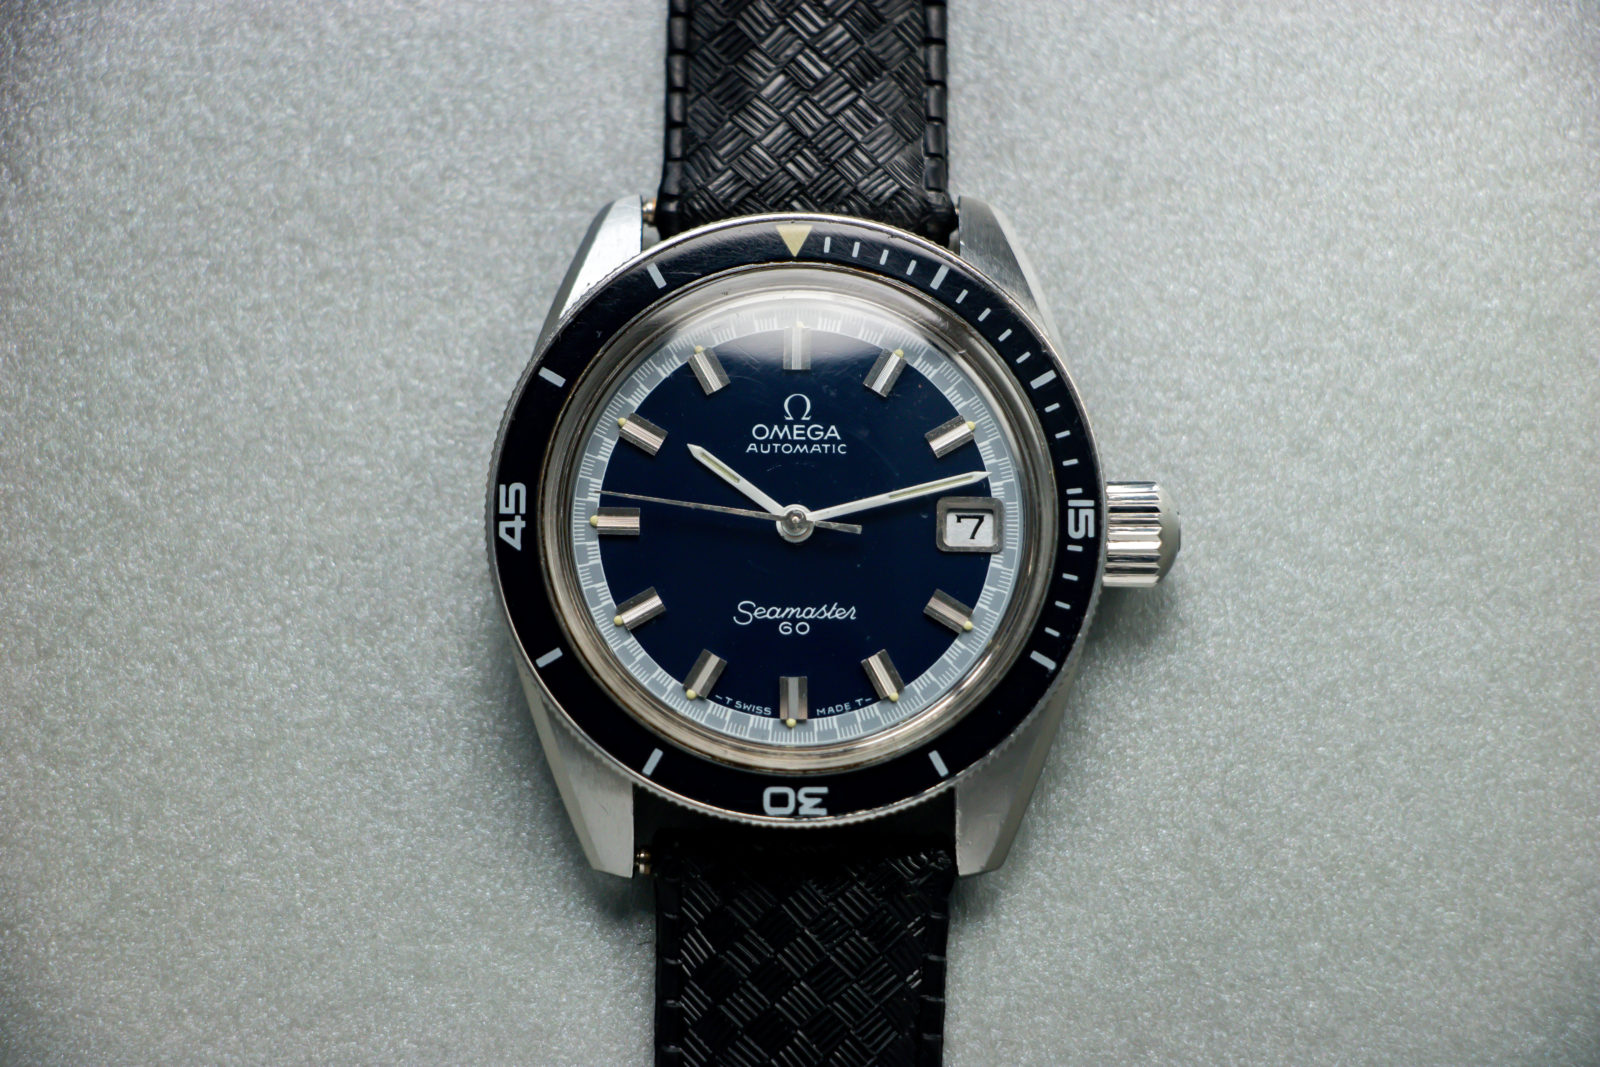 1970 OMEGA SEAMASTER 60 166062 • Vintage Watches For Sale ...